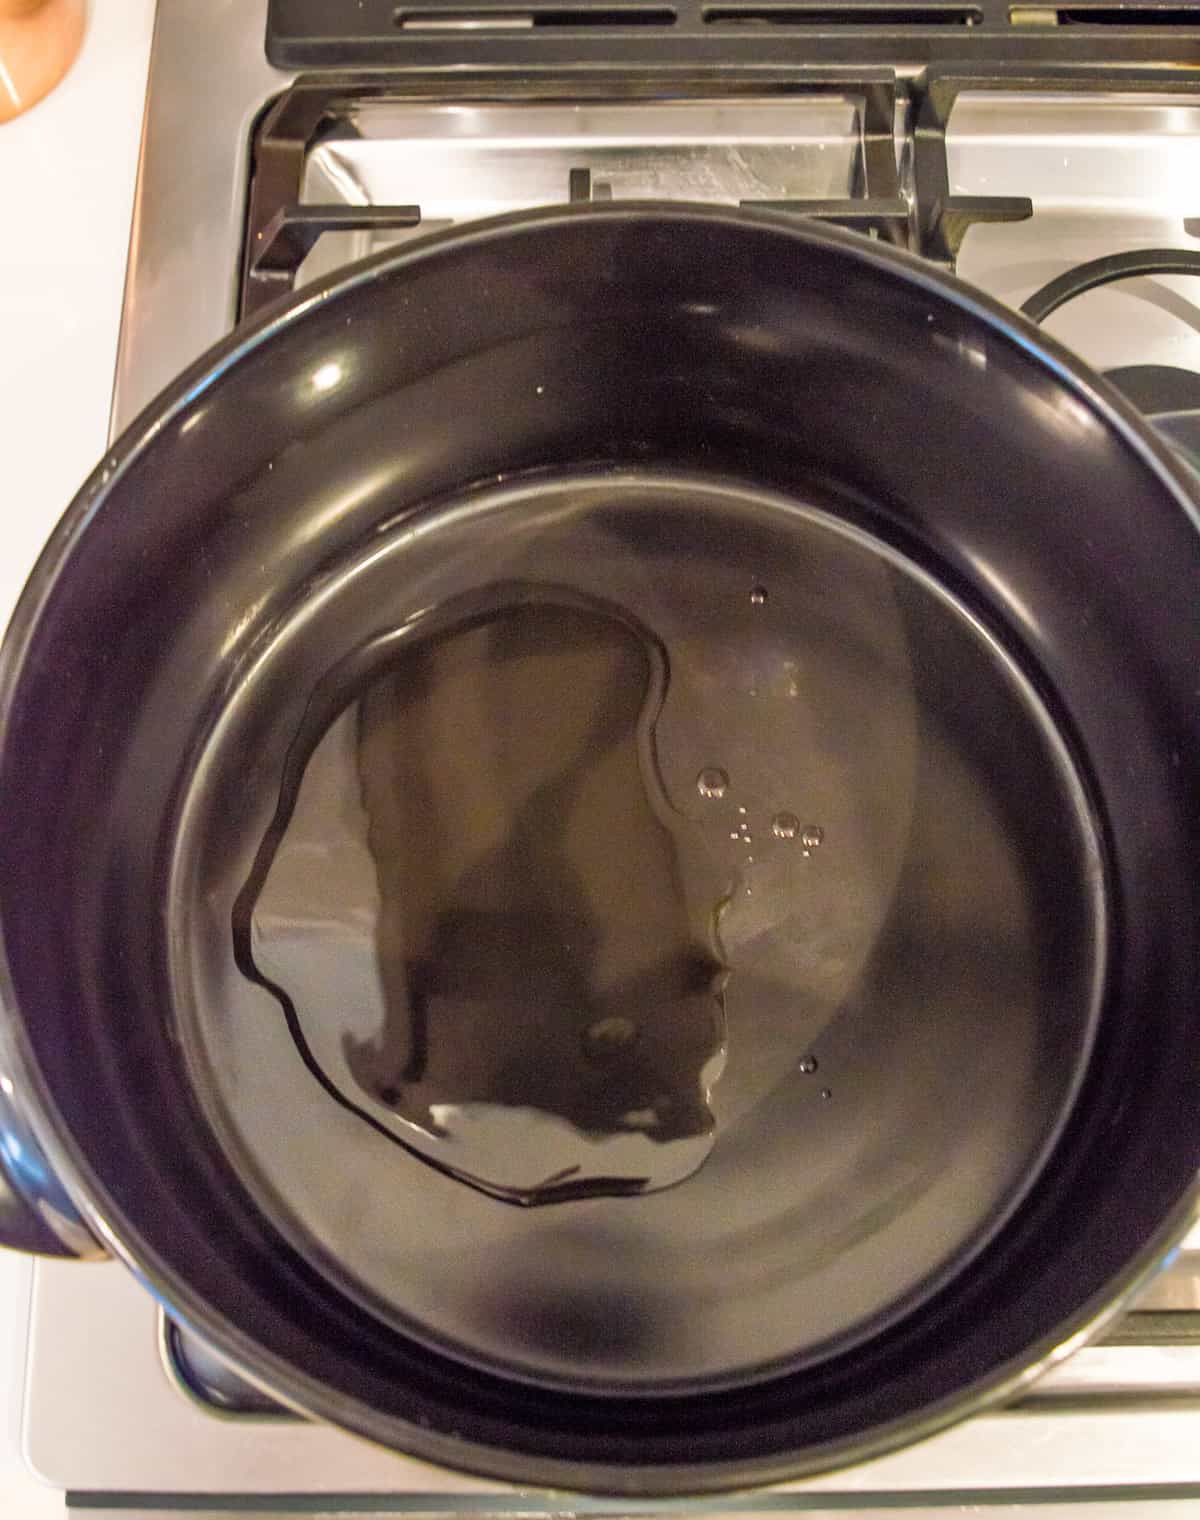 A large black ceramic pot on the stovetop with oil in it.